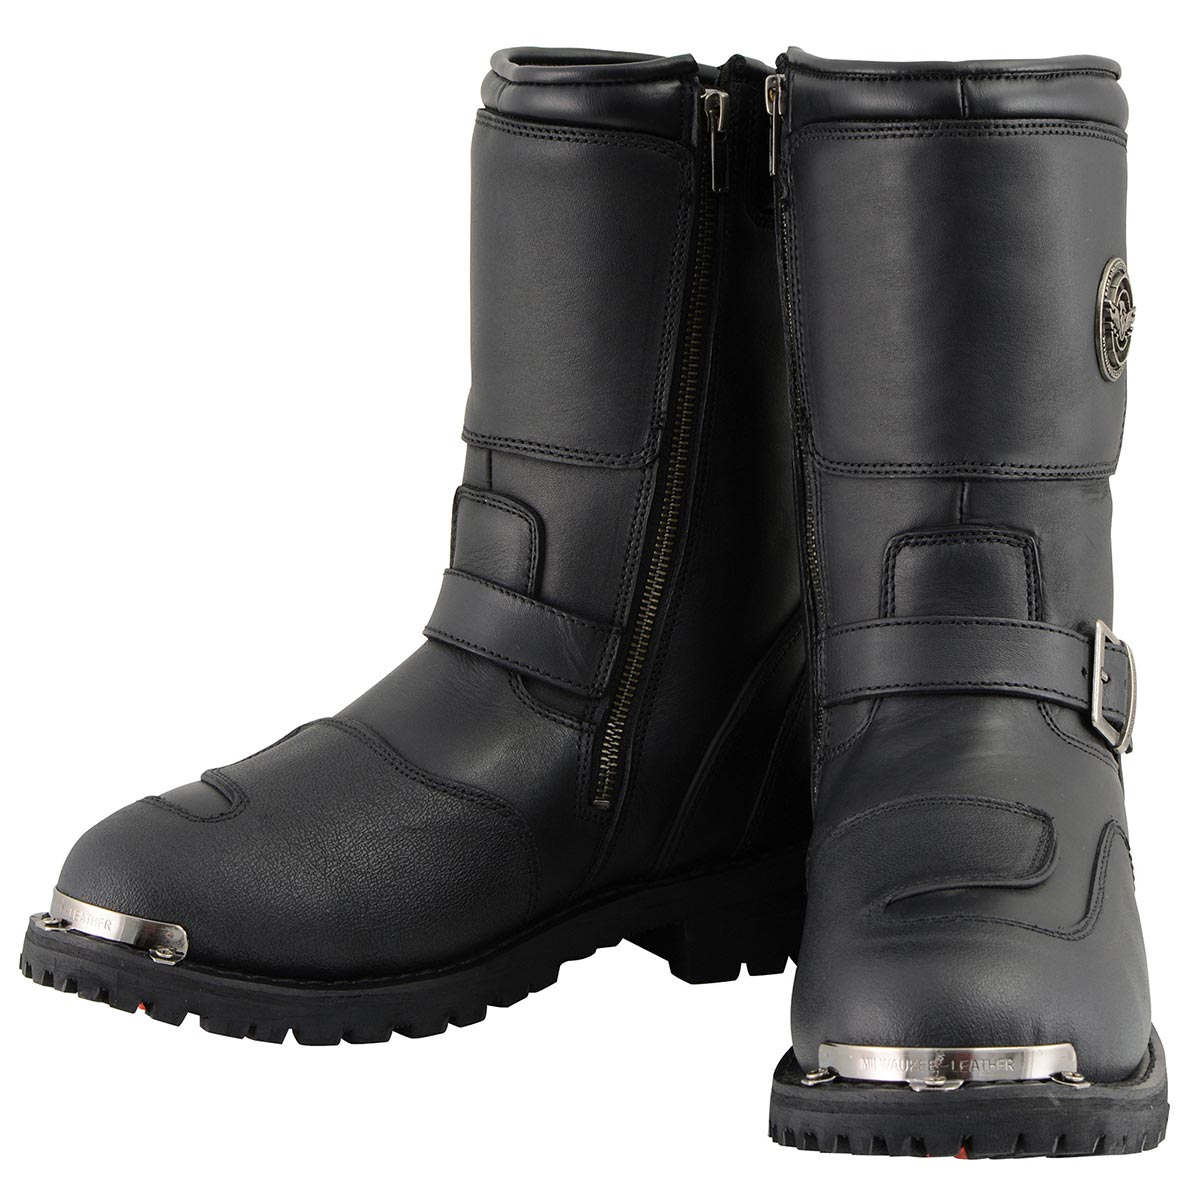 Milwaukee Leather MBM9070 Men's Black Leather Engineer Motorcycle Boots w/ Reflective Piping/Gear Shift Protection